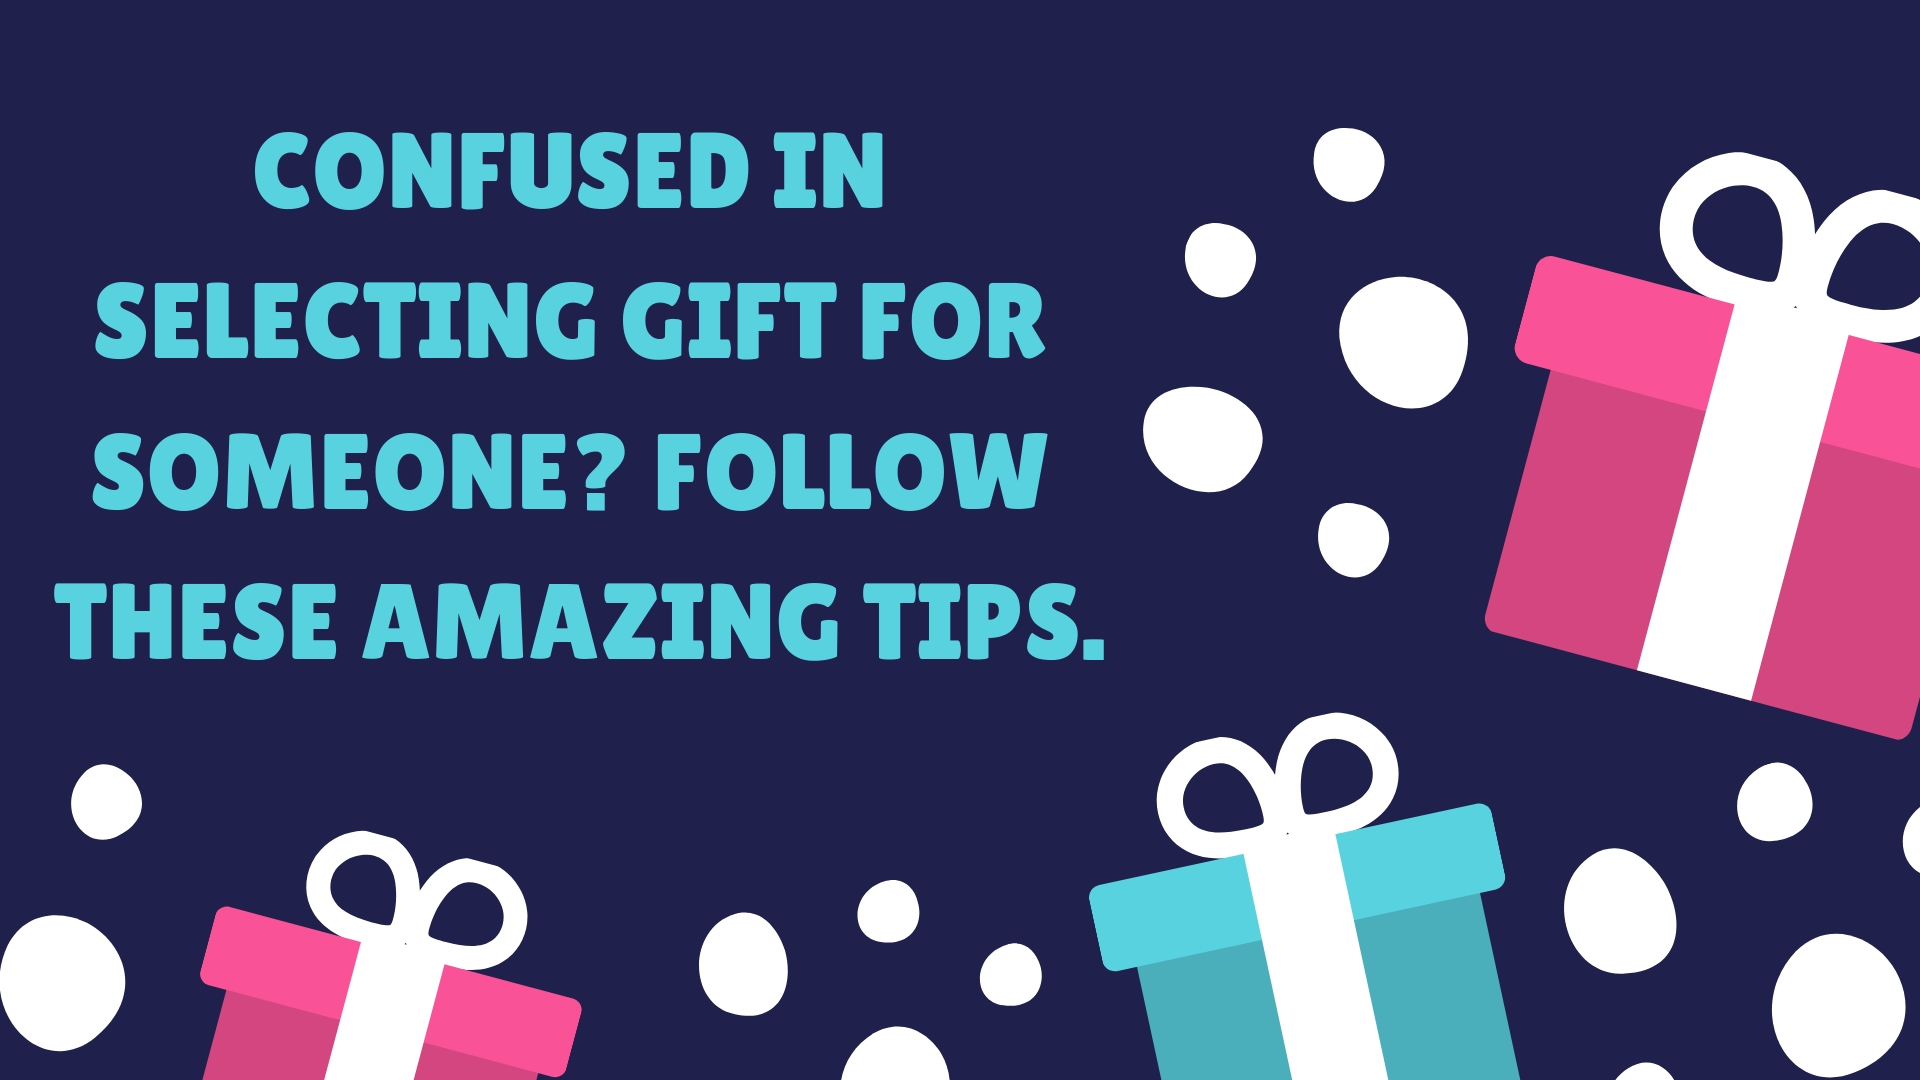 Confused in selecting gift for someone? Follow these amazing tips